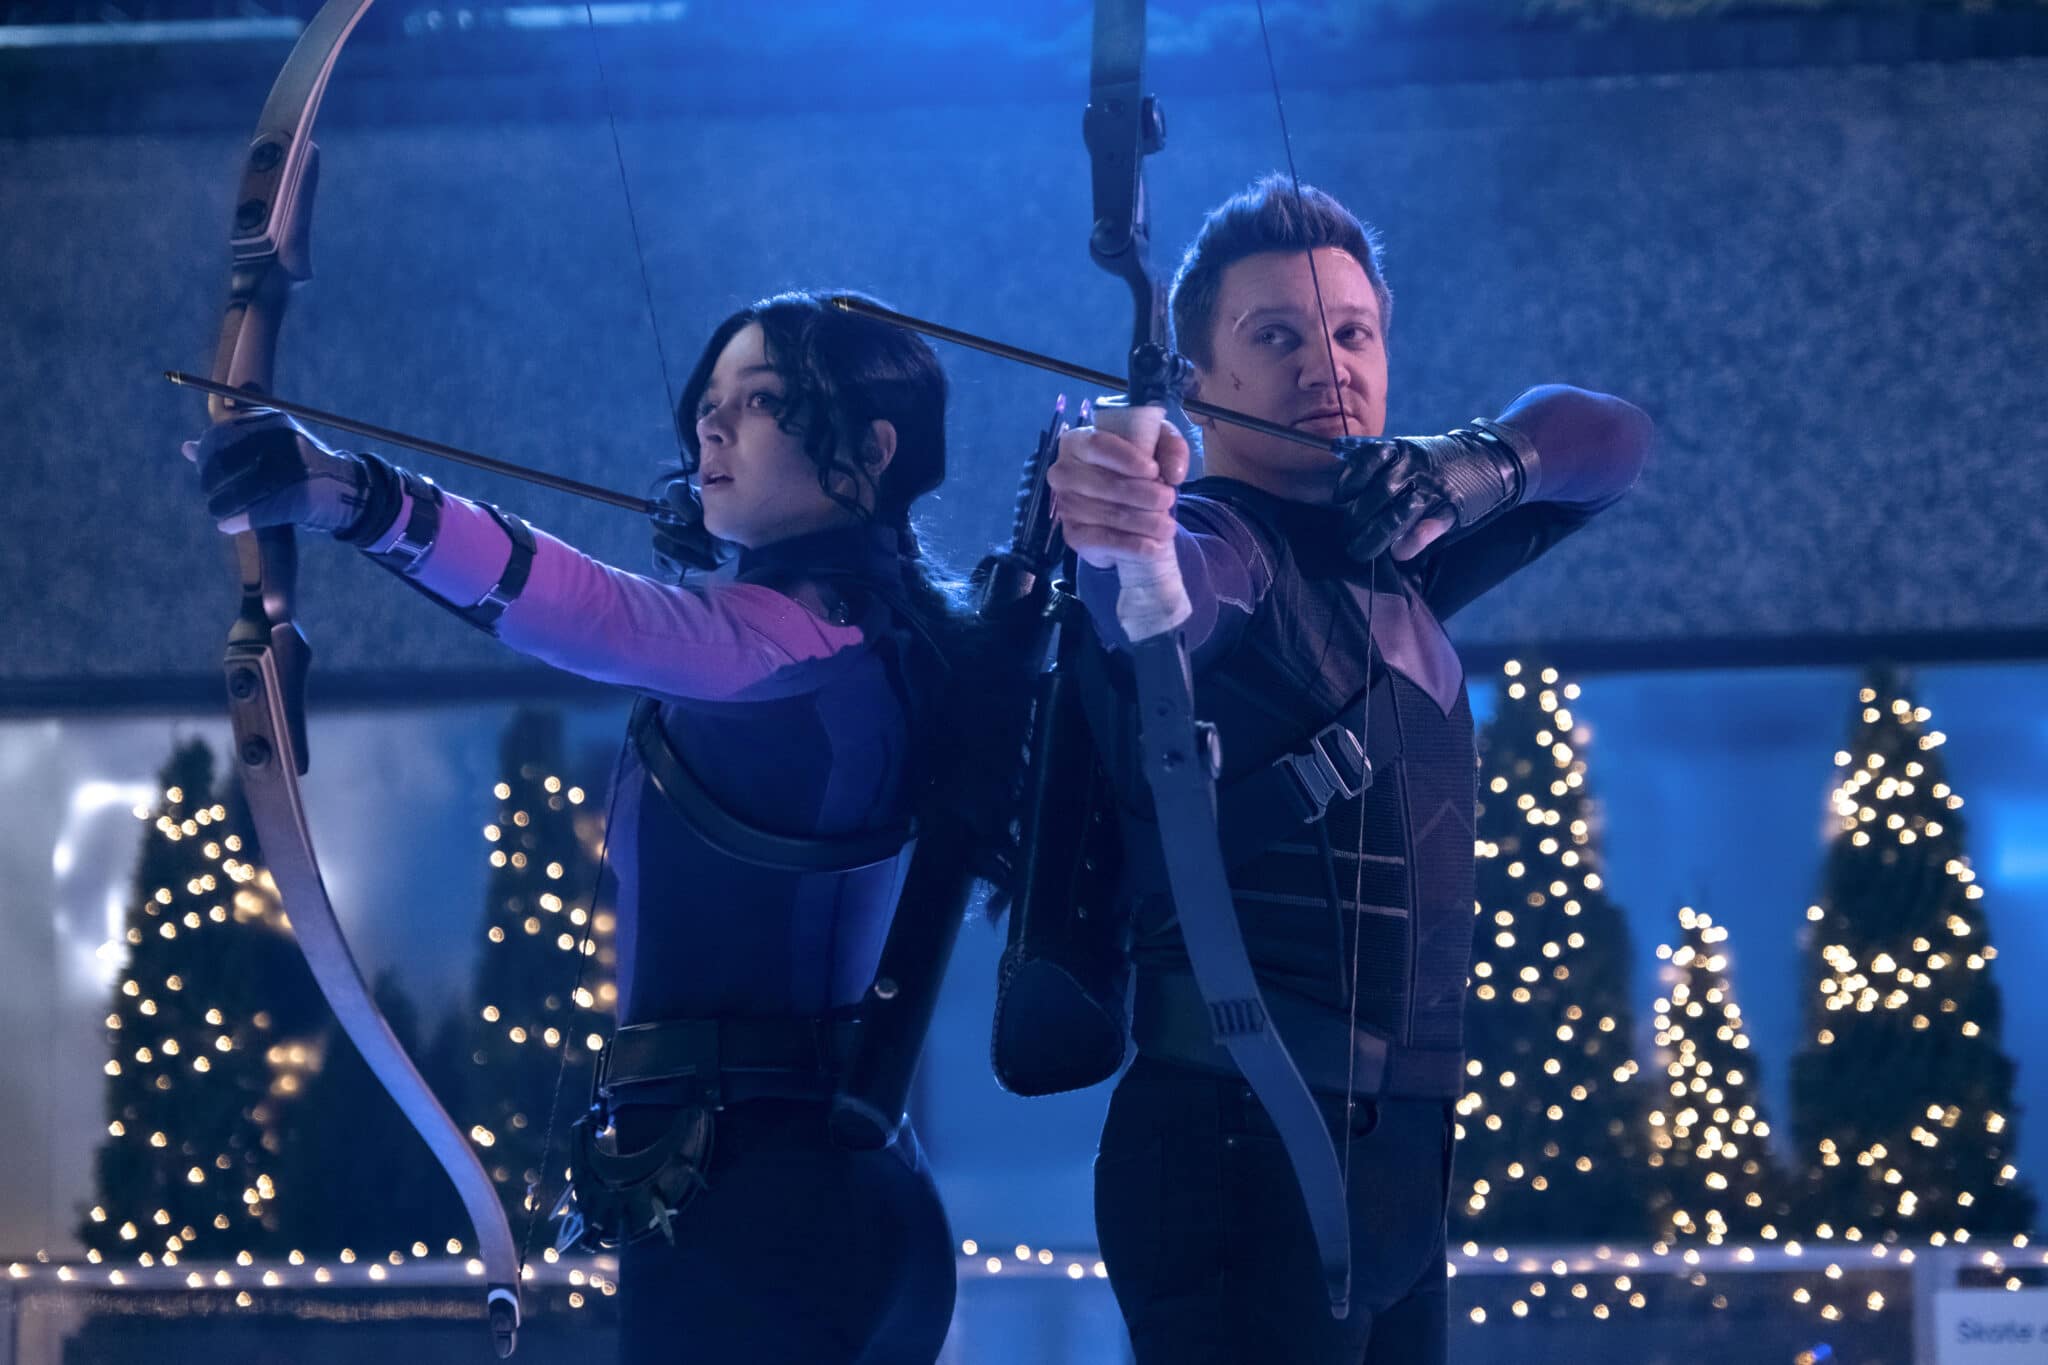 Hailee Steinfeld as Kate Bishop and Jeremy Renner as Clint Barton/Hawkeye